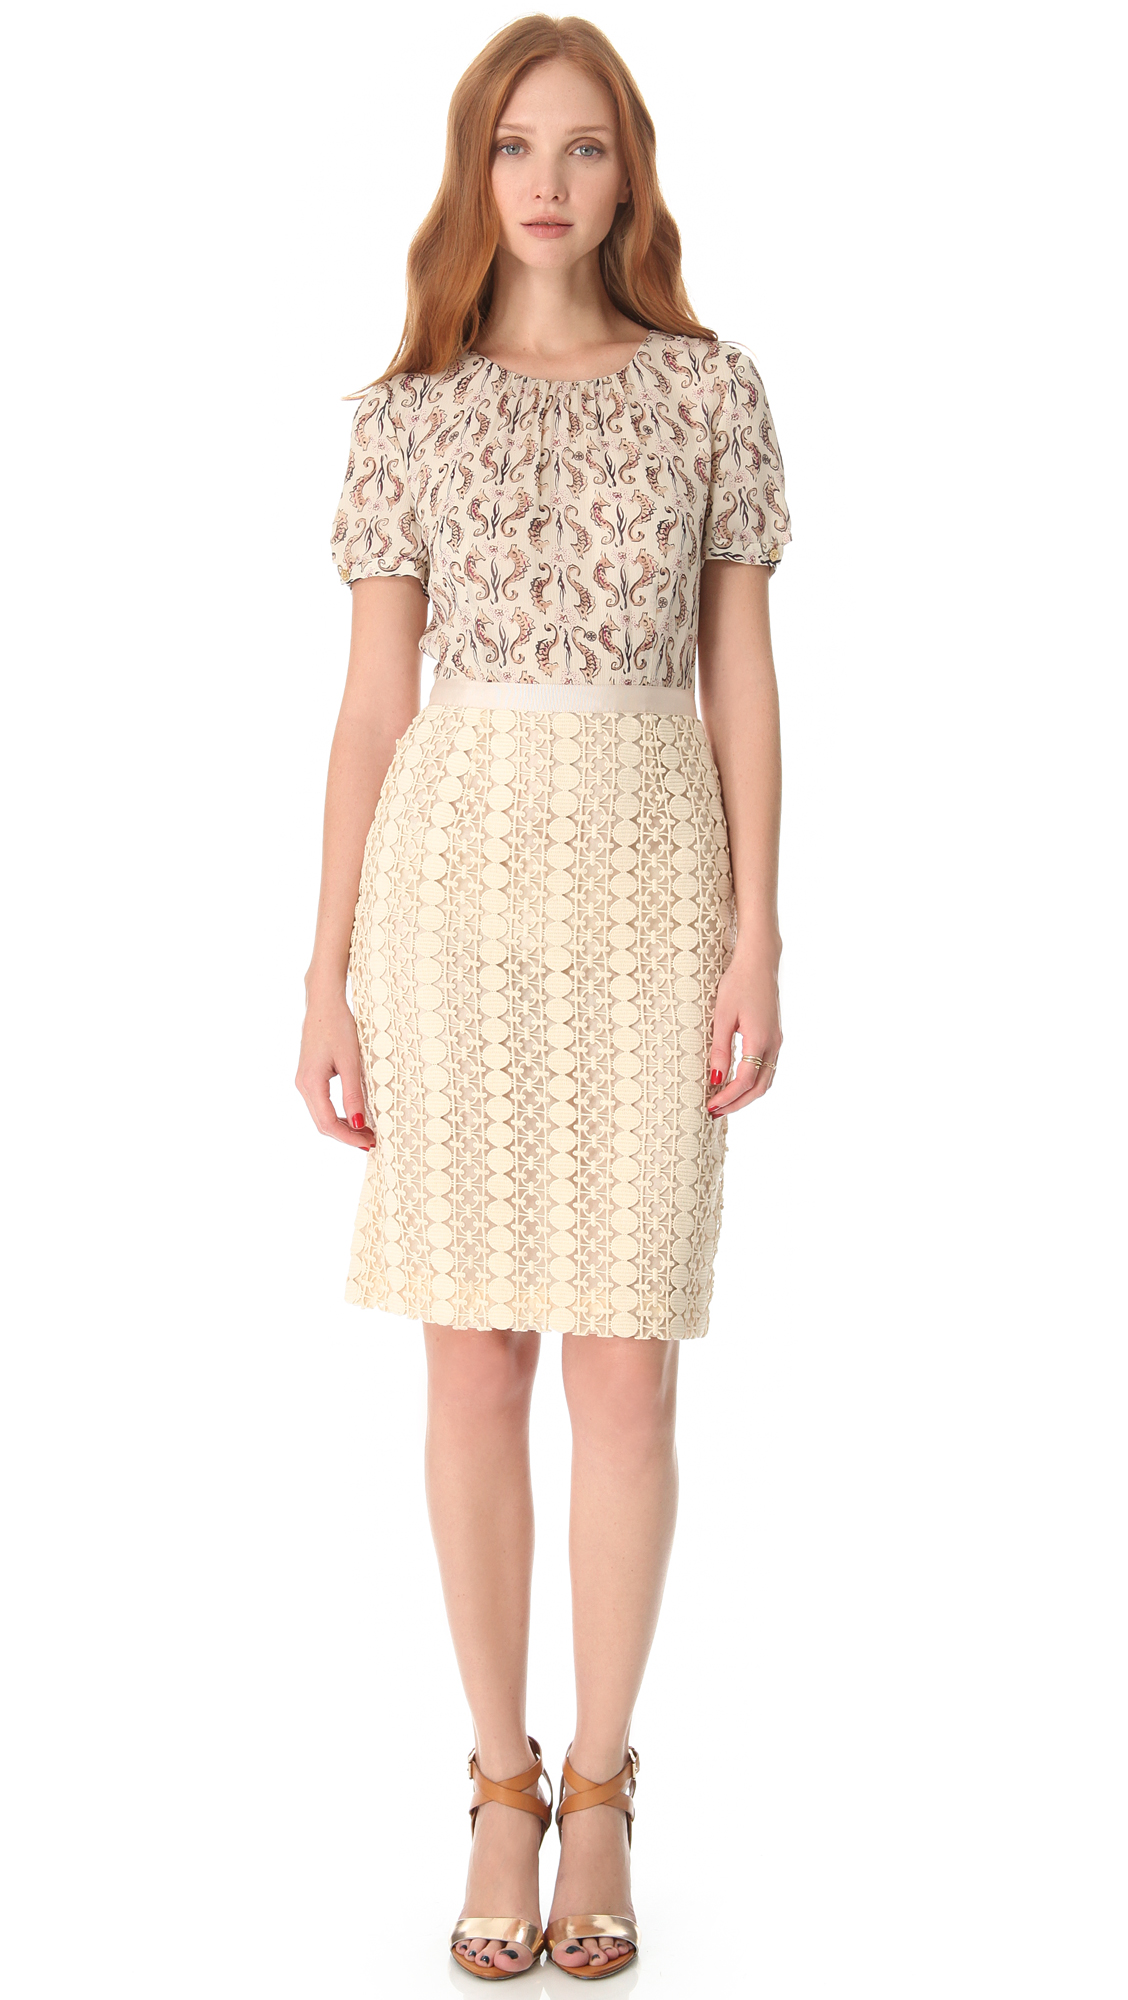 Tory Burch Adelaide Seahorse Dress in Natural | Lyst Canada